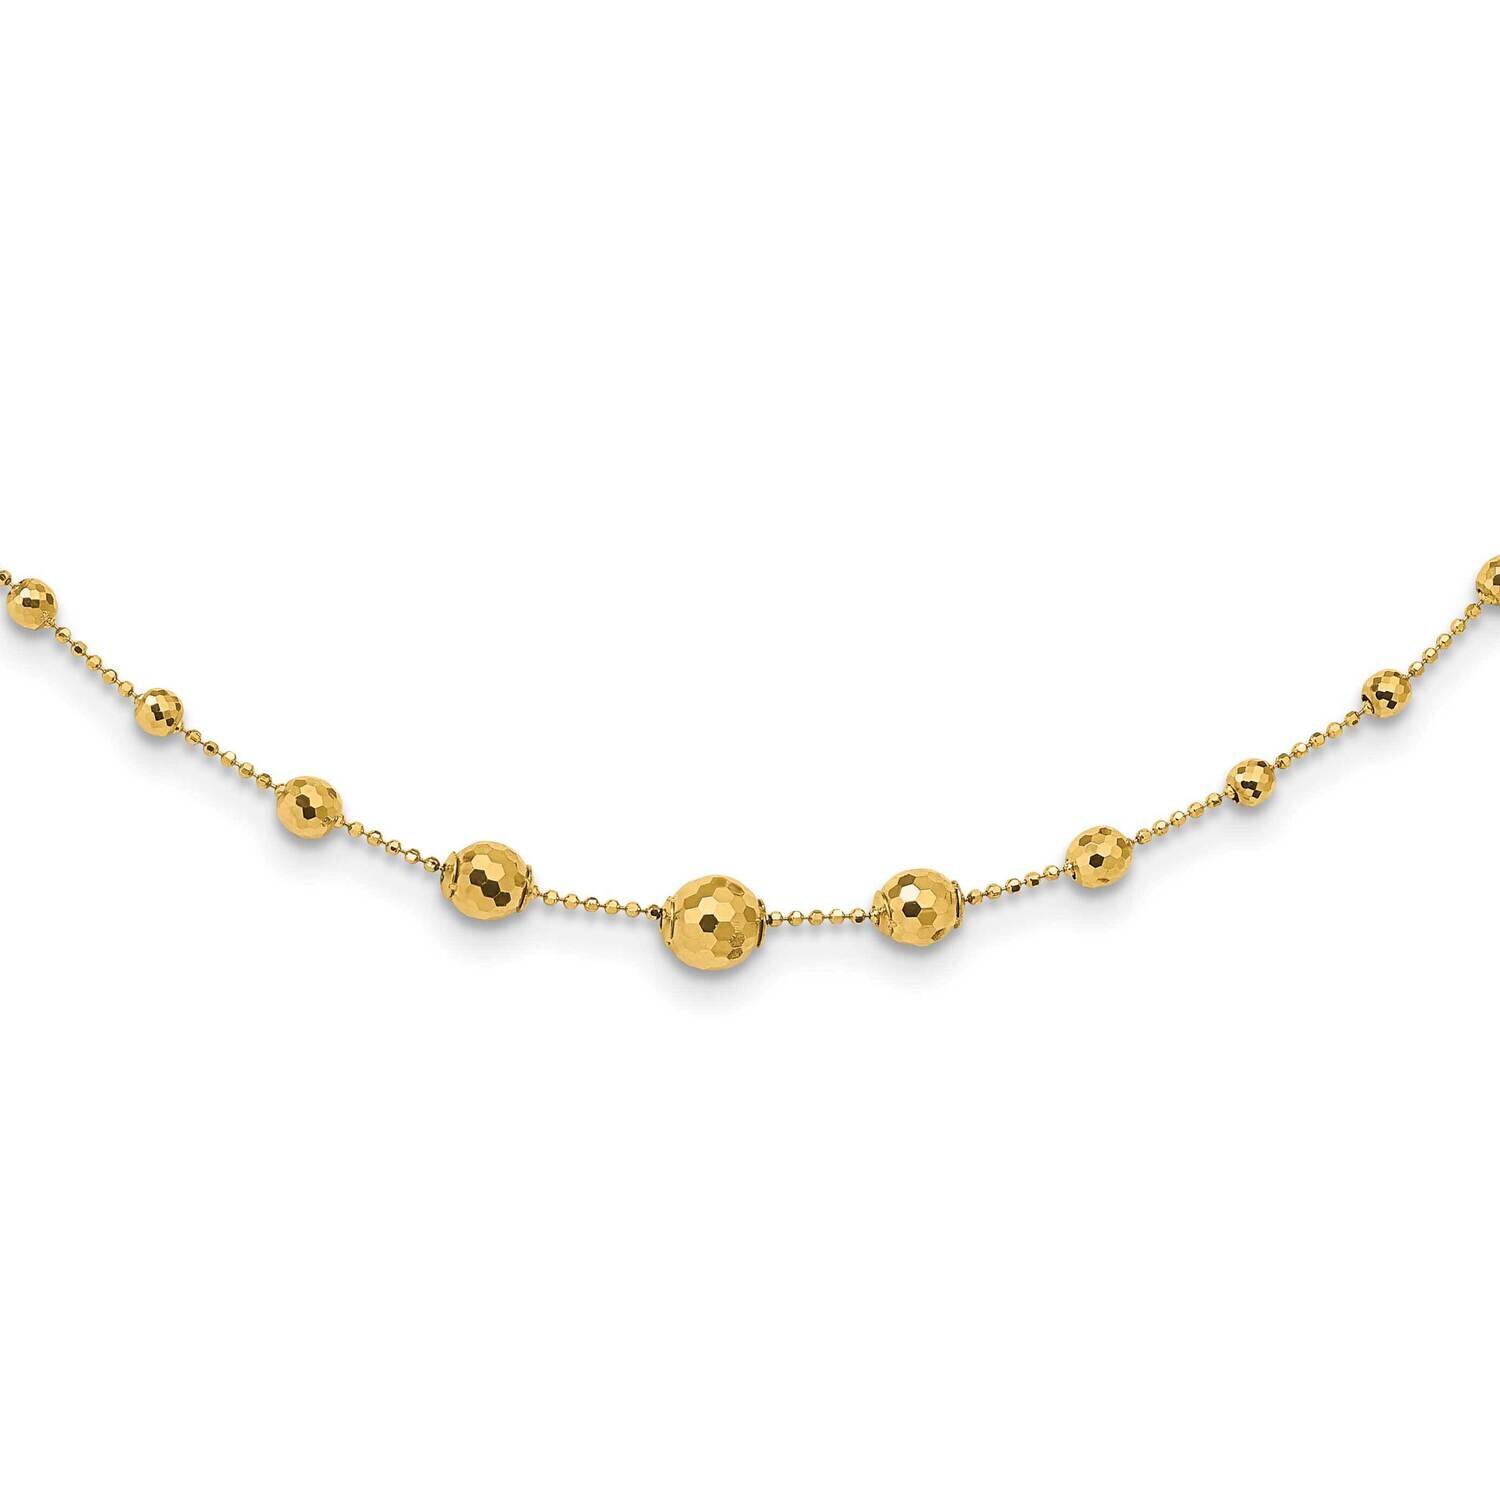 Textured Beaded 17 Inch Necklace 14k Gold Polished SF2859-17